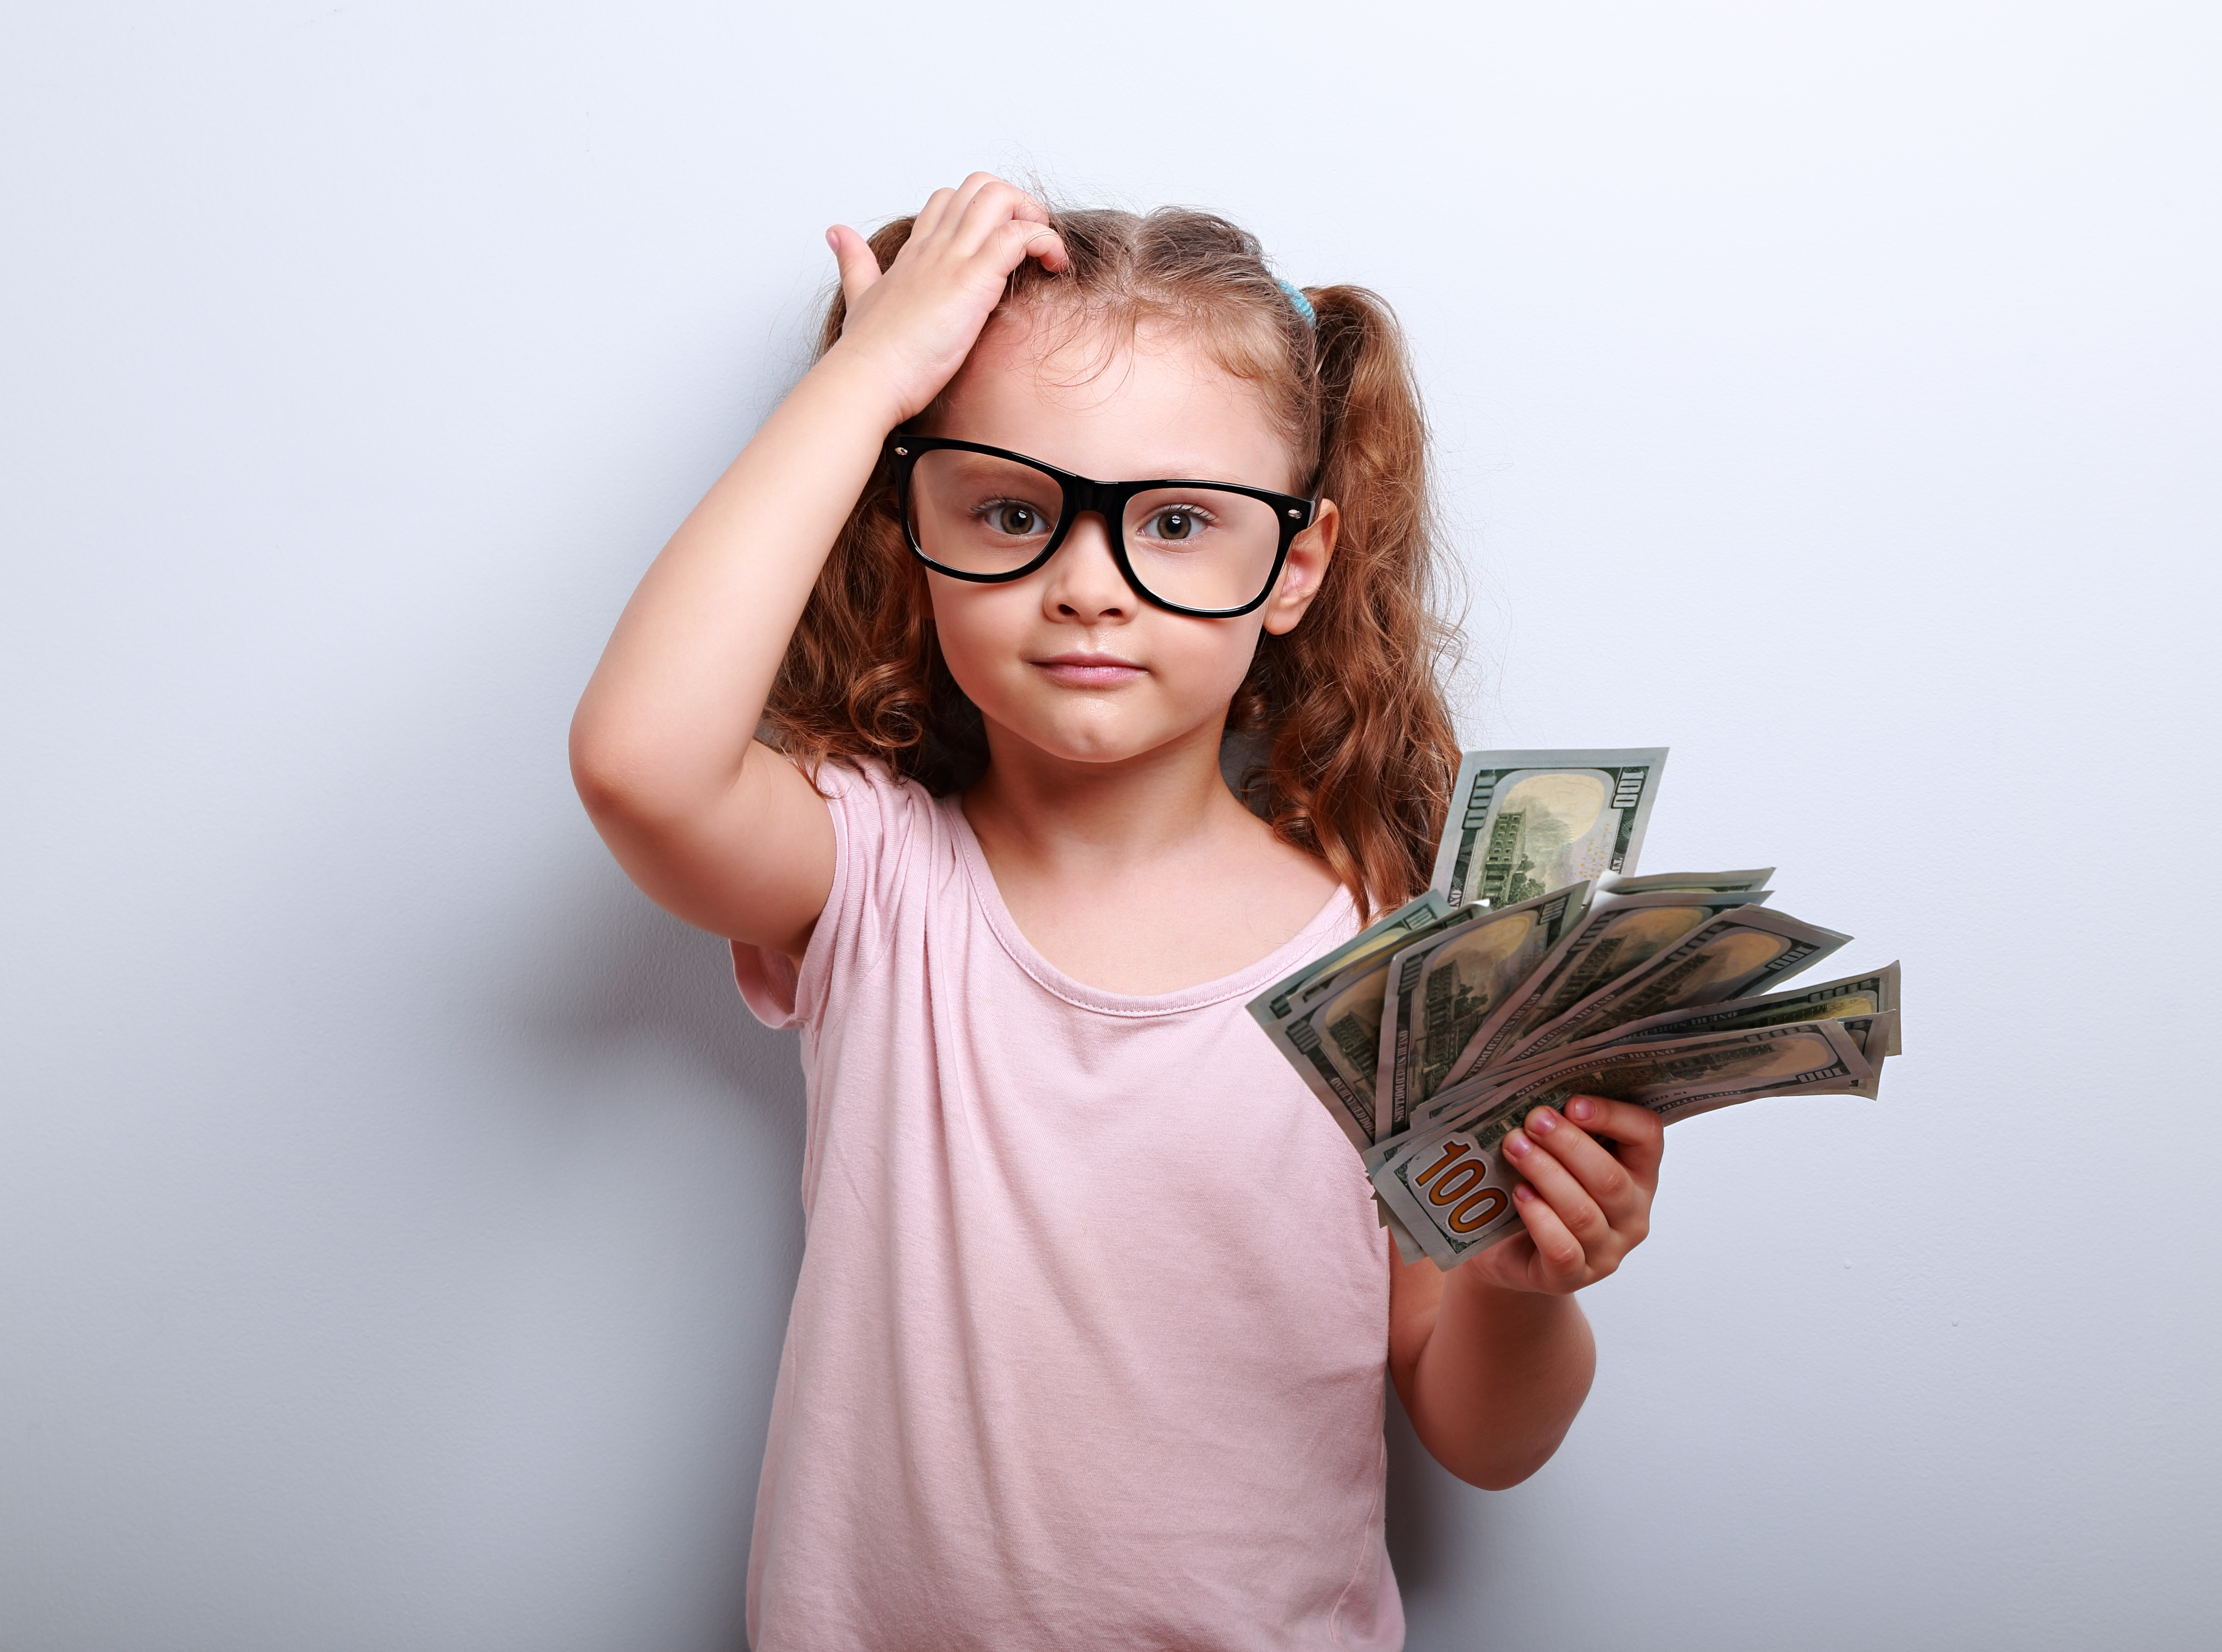 kids and financial responsibility